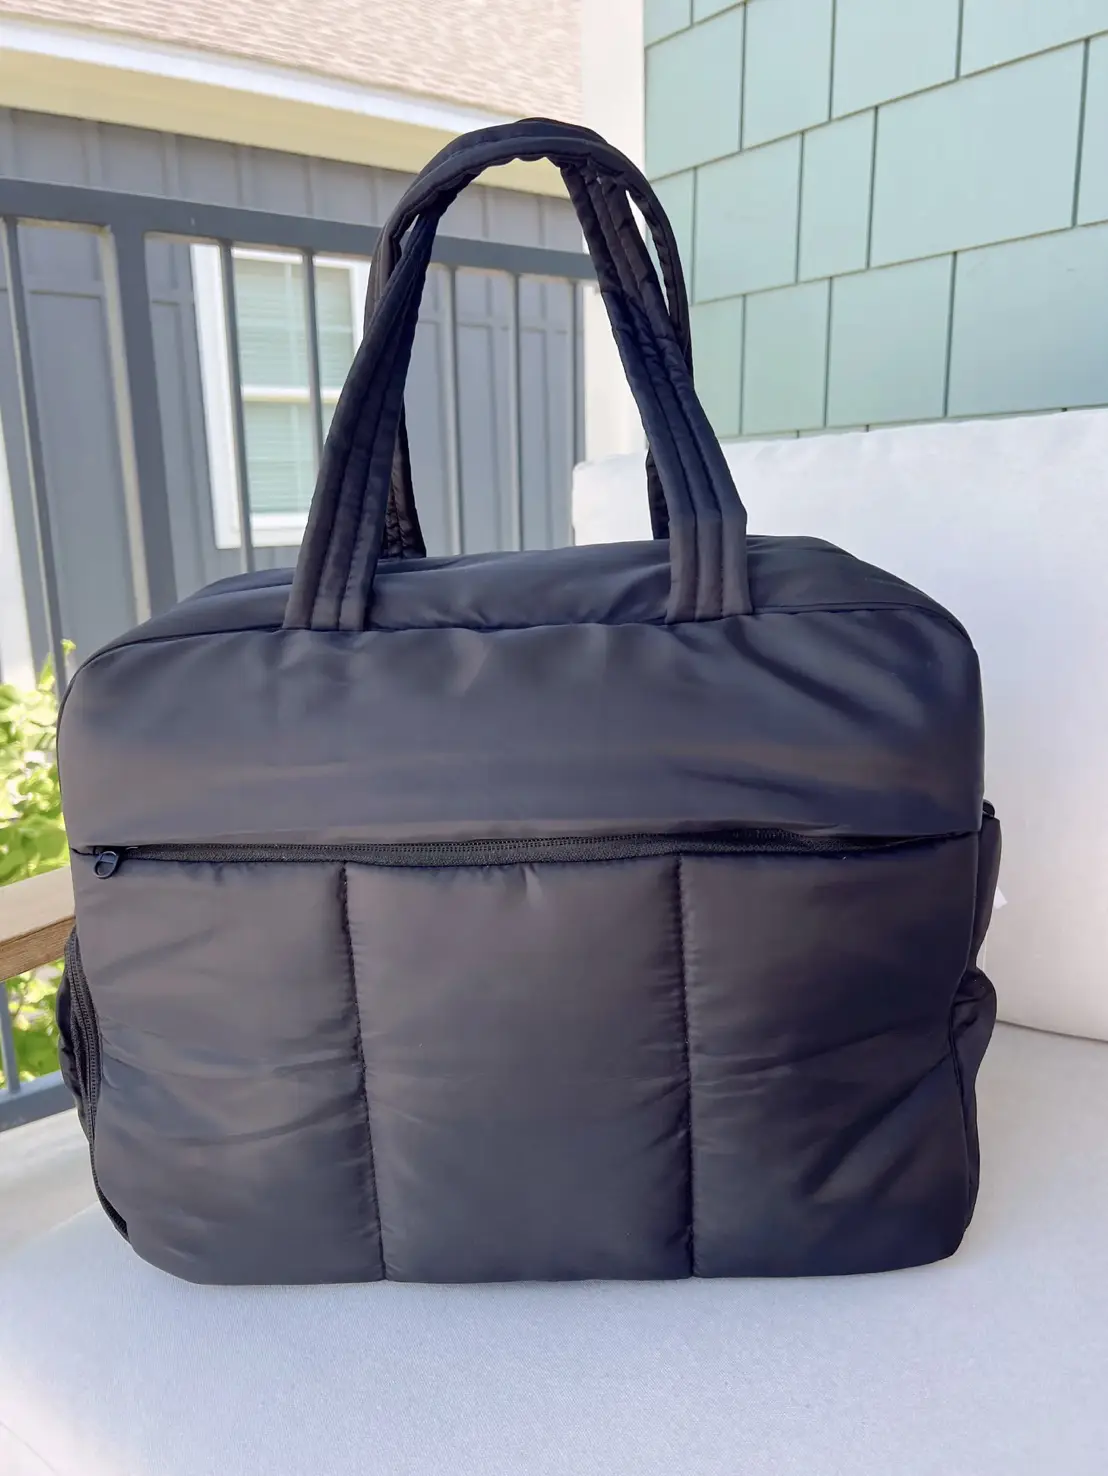 Marshalls Finds, Calpak Duffel, Gallery posted by Shantaye